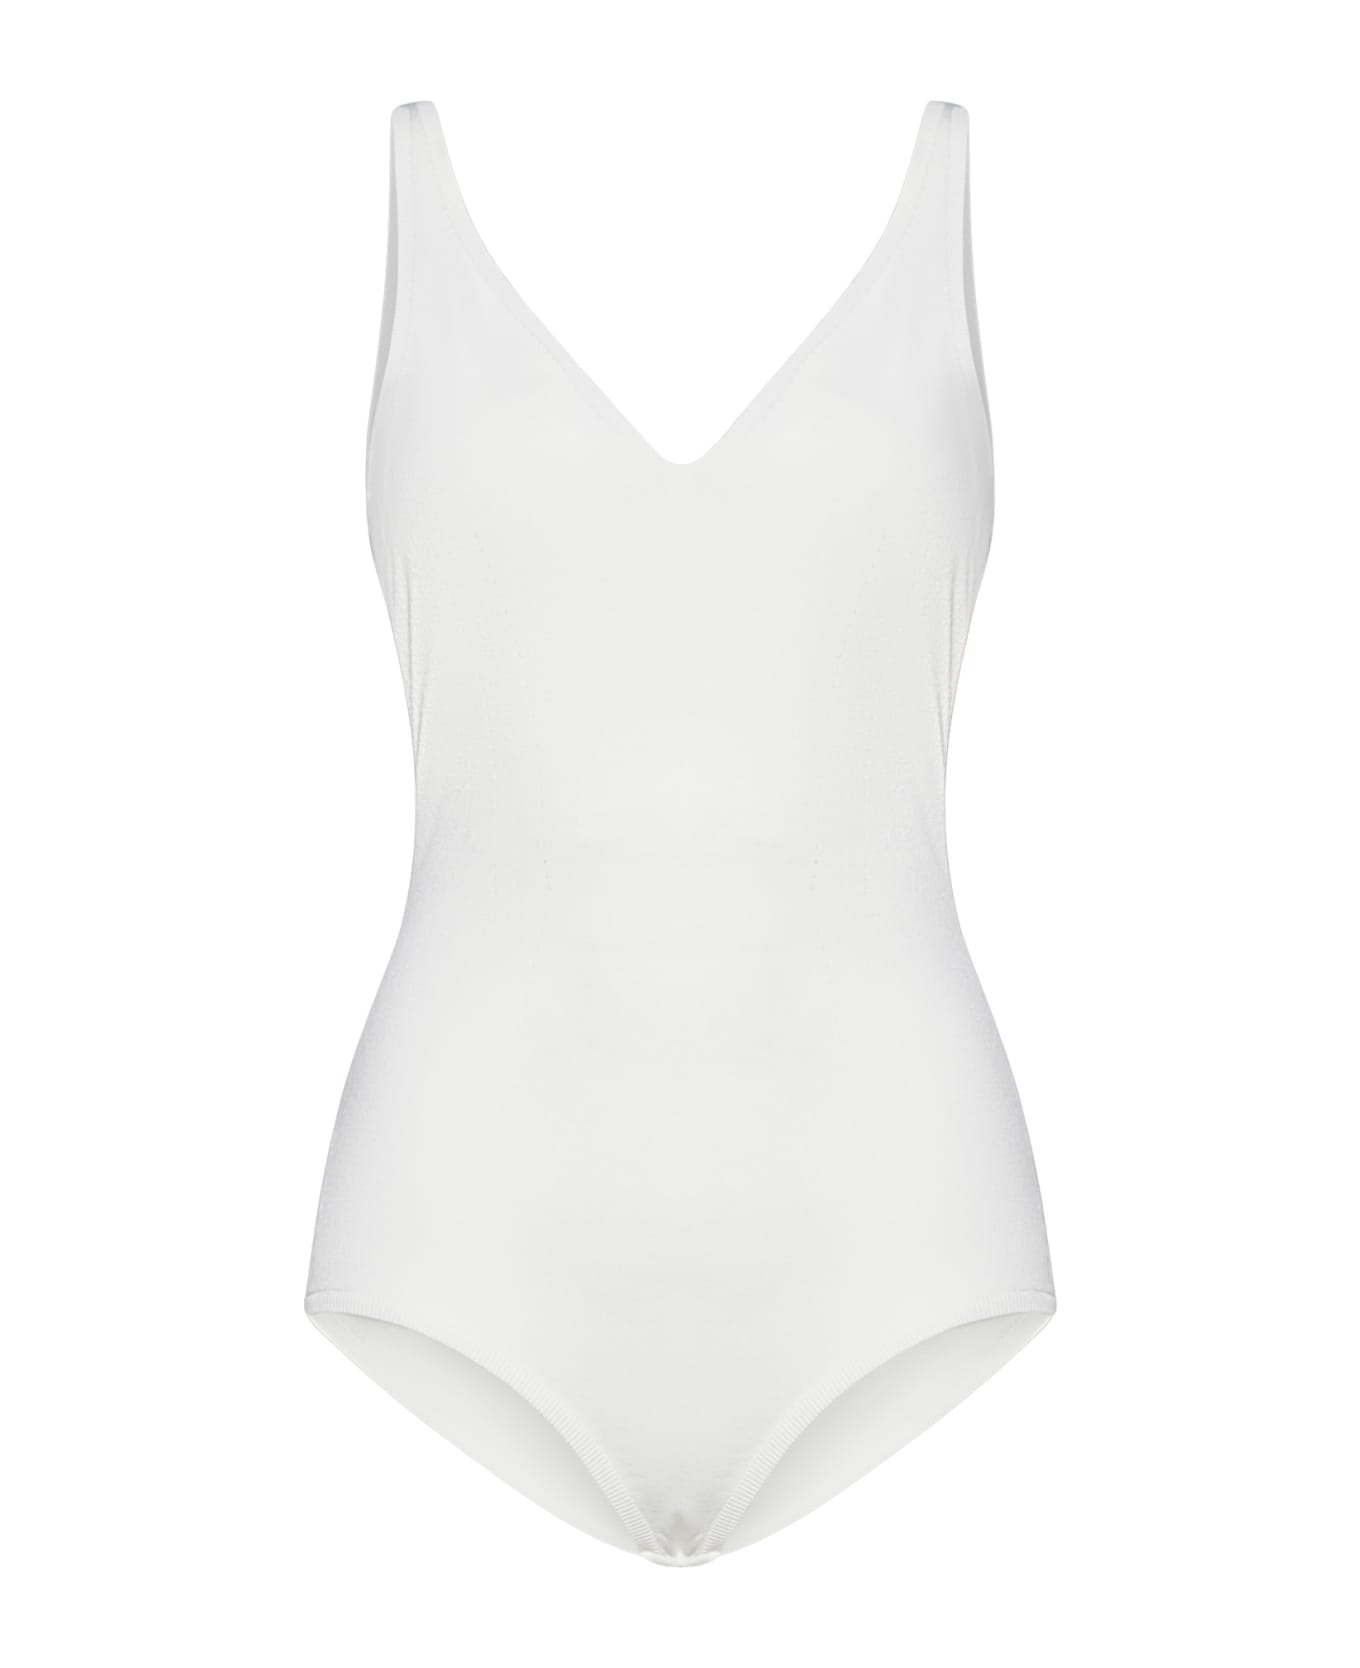 Alexander McQueen White Body Top With Perforated Stripes - Bianco